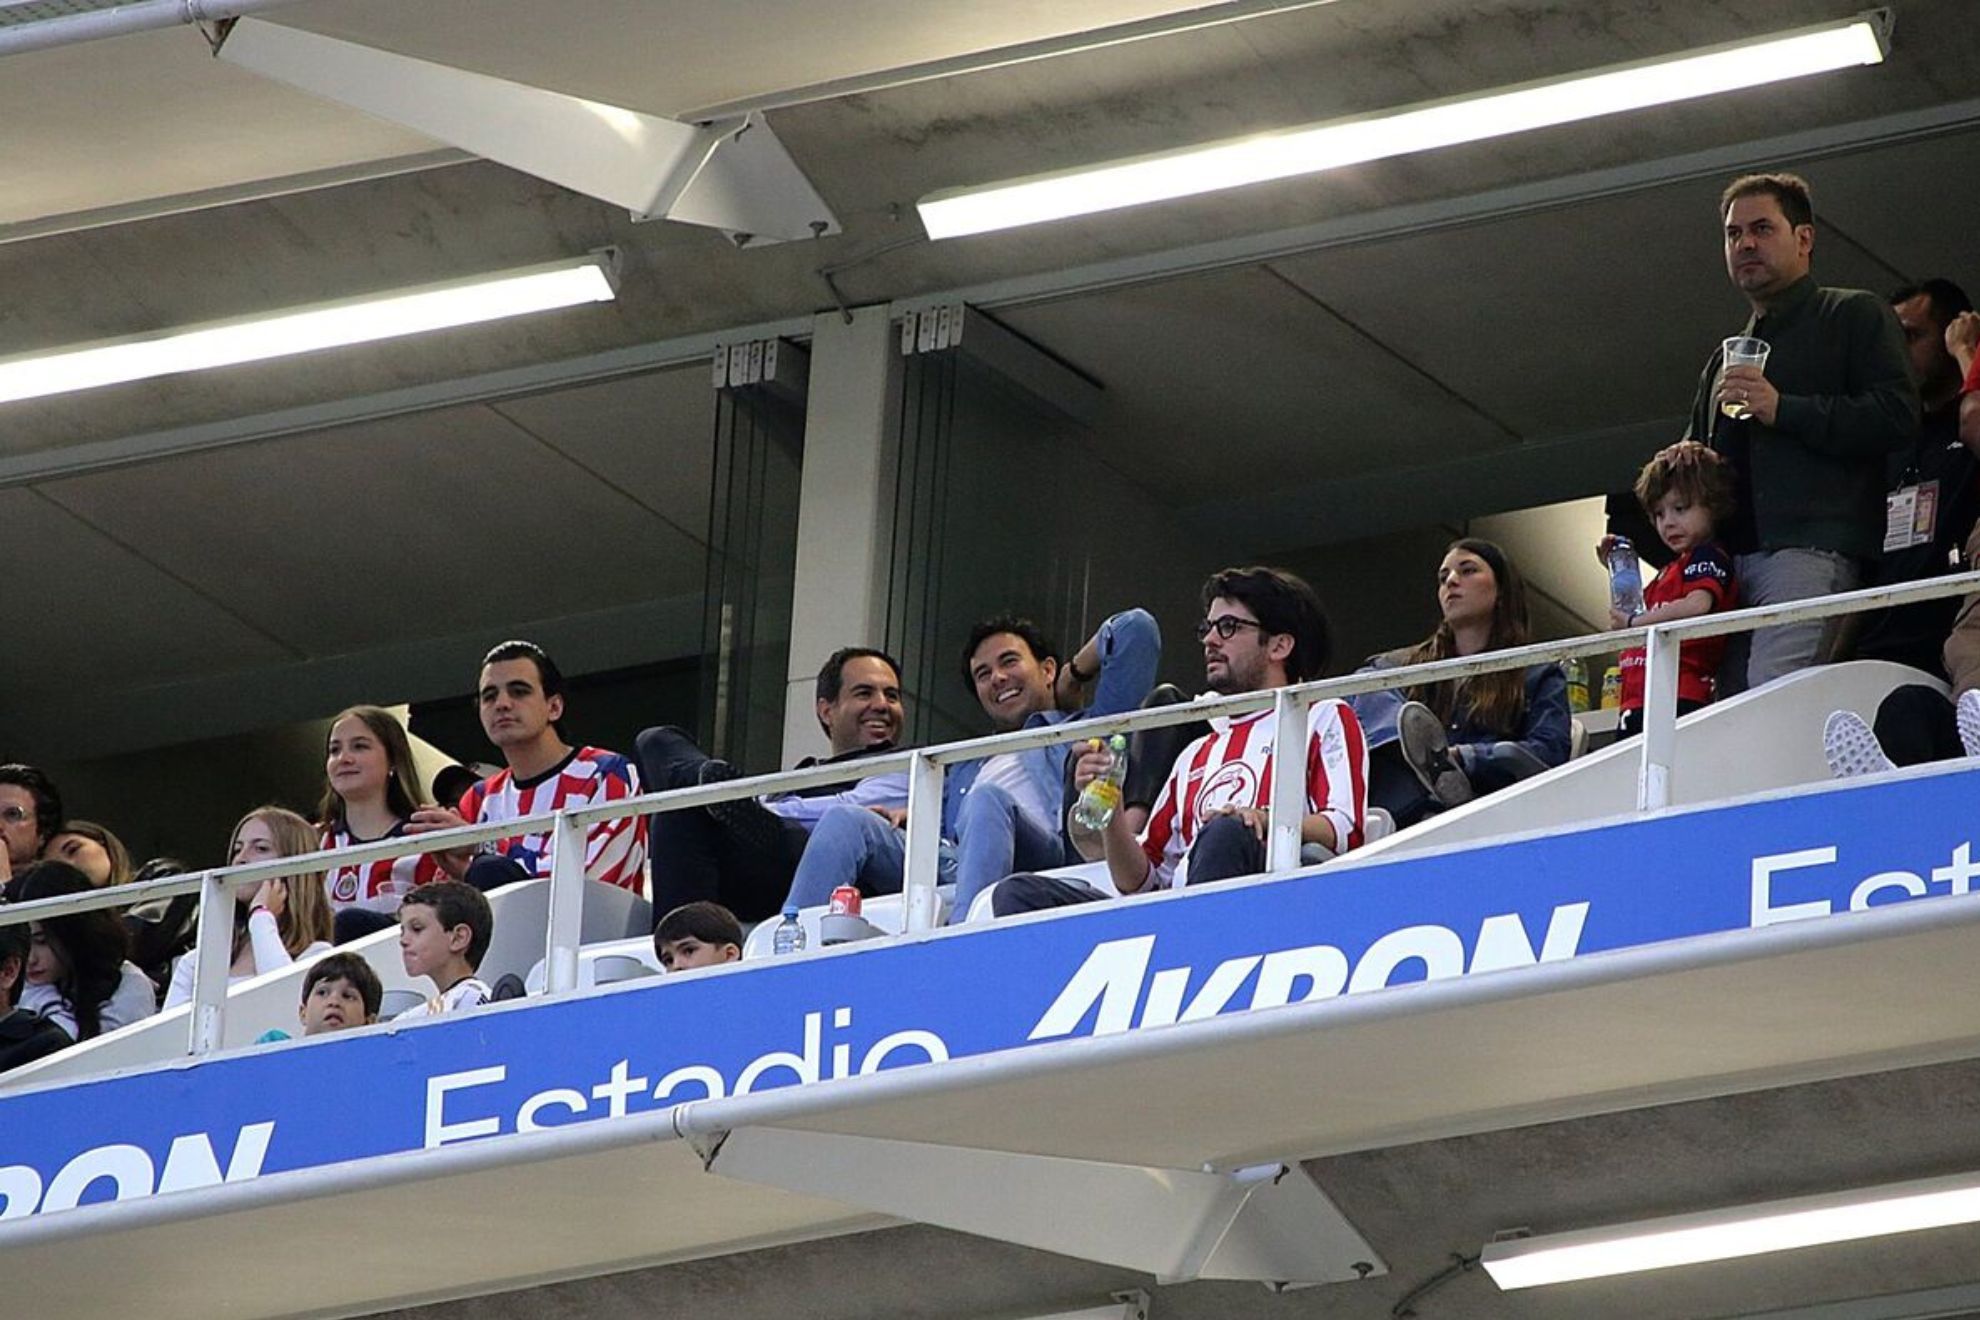 Checo Prez betrays Club Amrica; is seen at Akron Stadium supporting Chivas